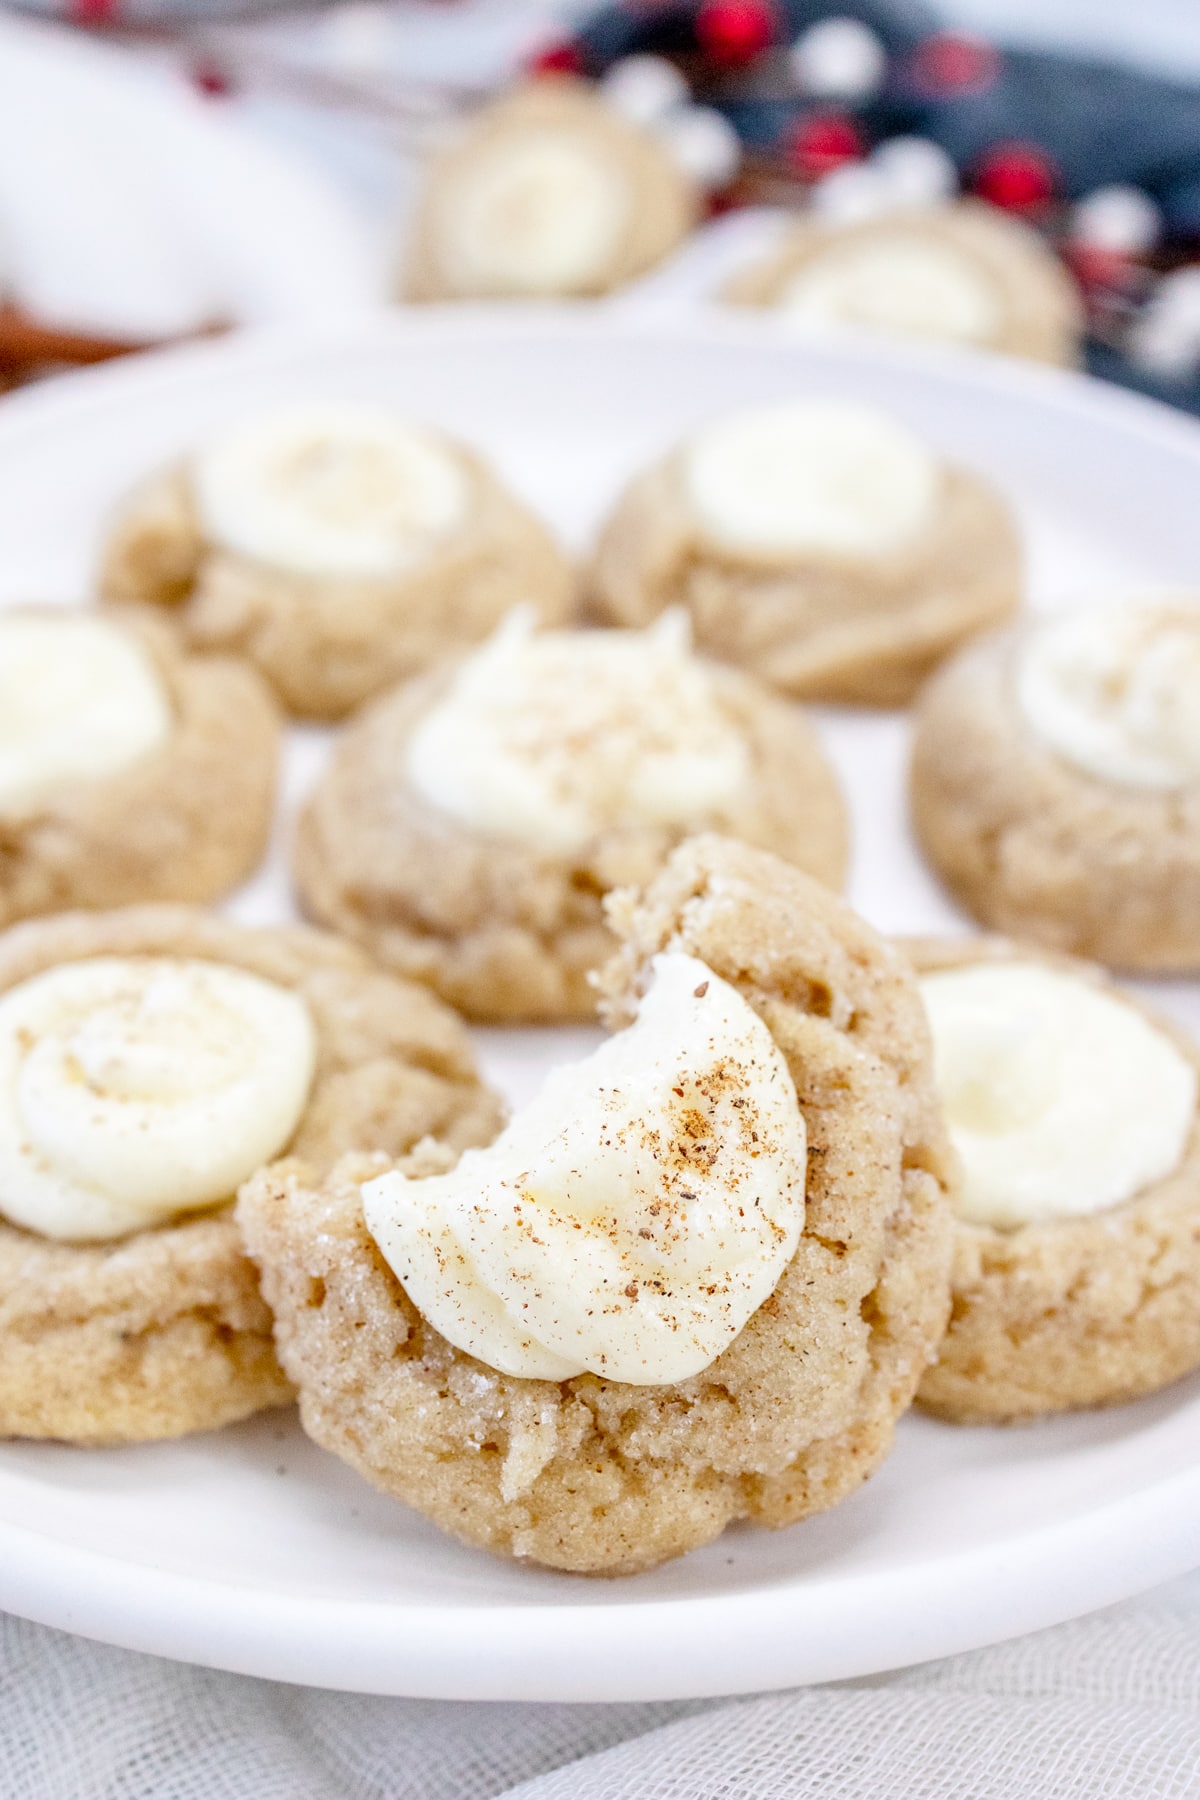 Close up of Eggnog Thumbprint Cookies on a white plate. The foremost cookie has had a bite taken out of it.